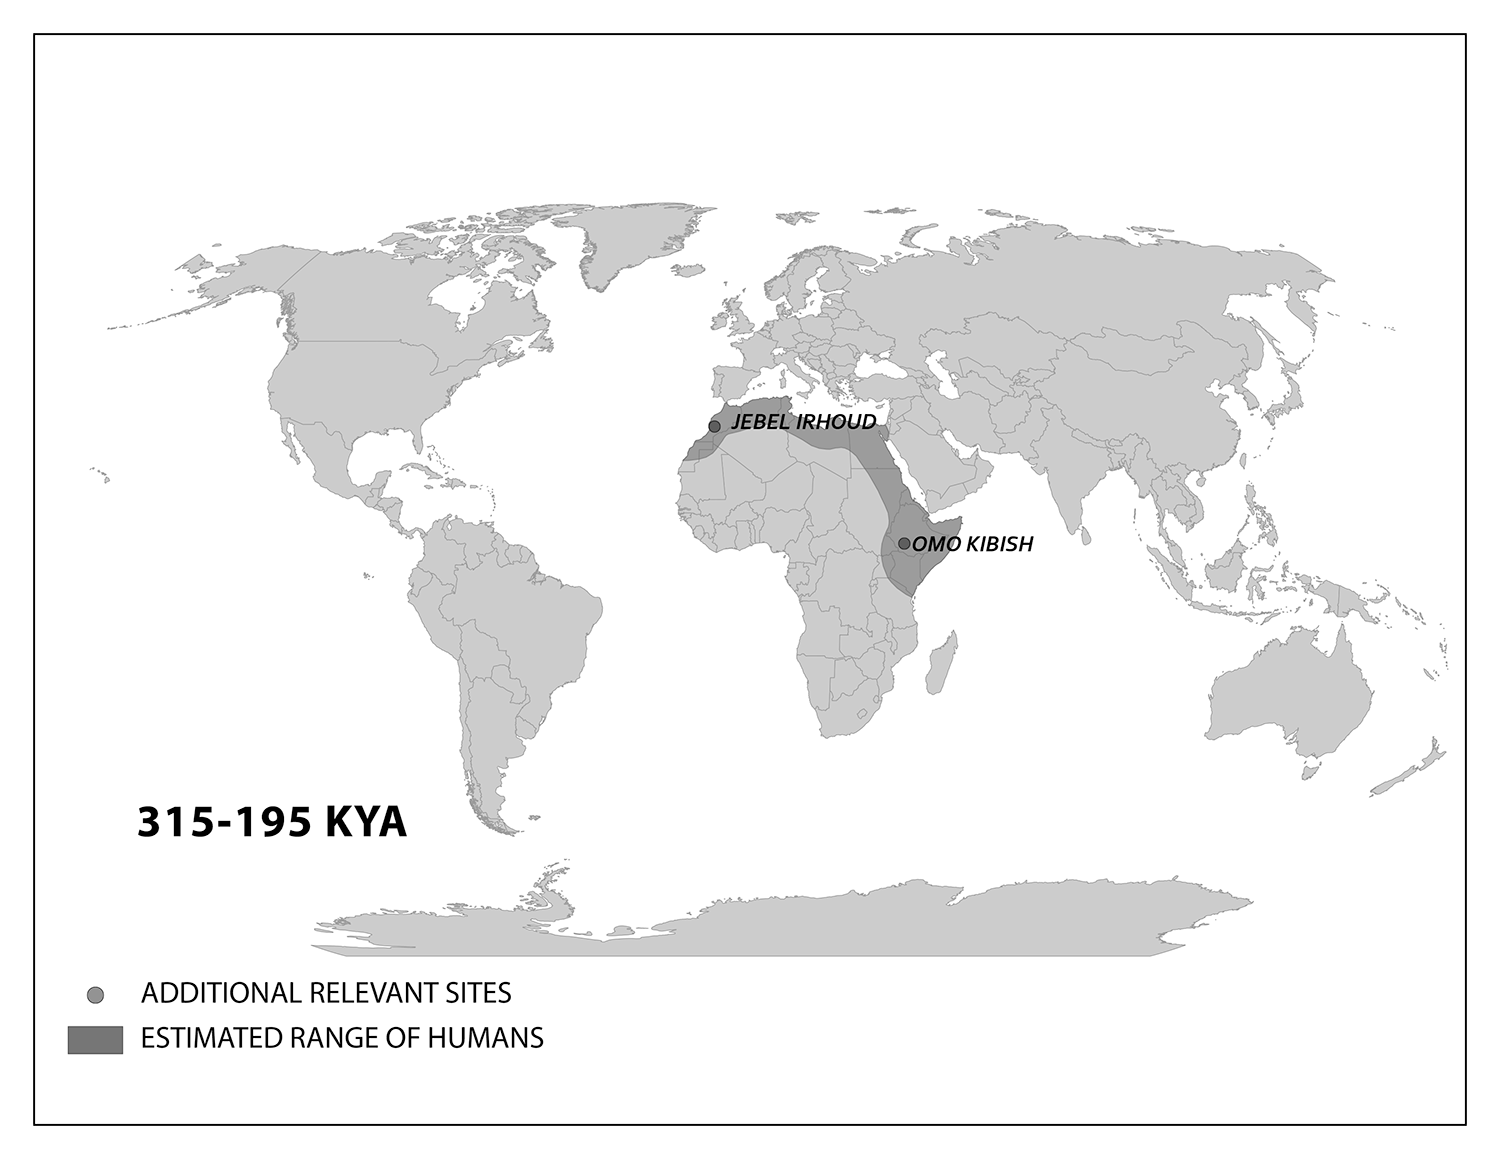 315 to 195 KYA. Northern to eastern coasts of Africa are shaded.